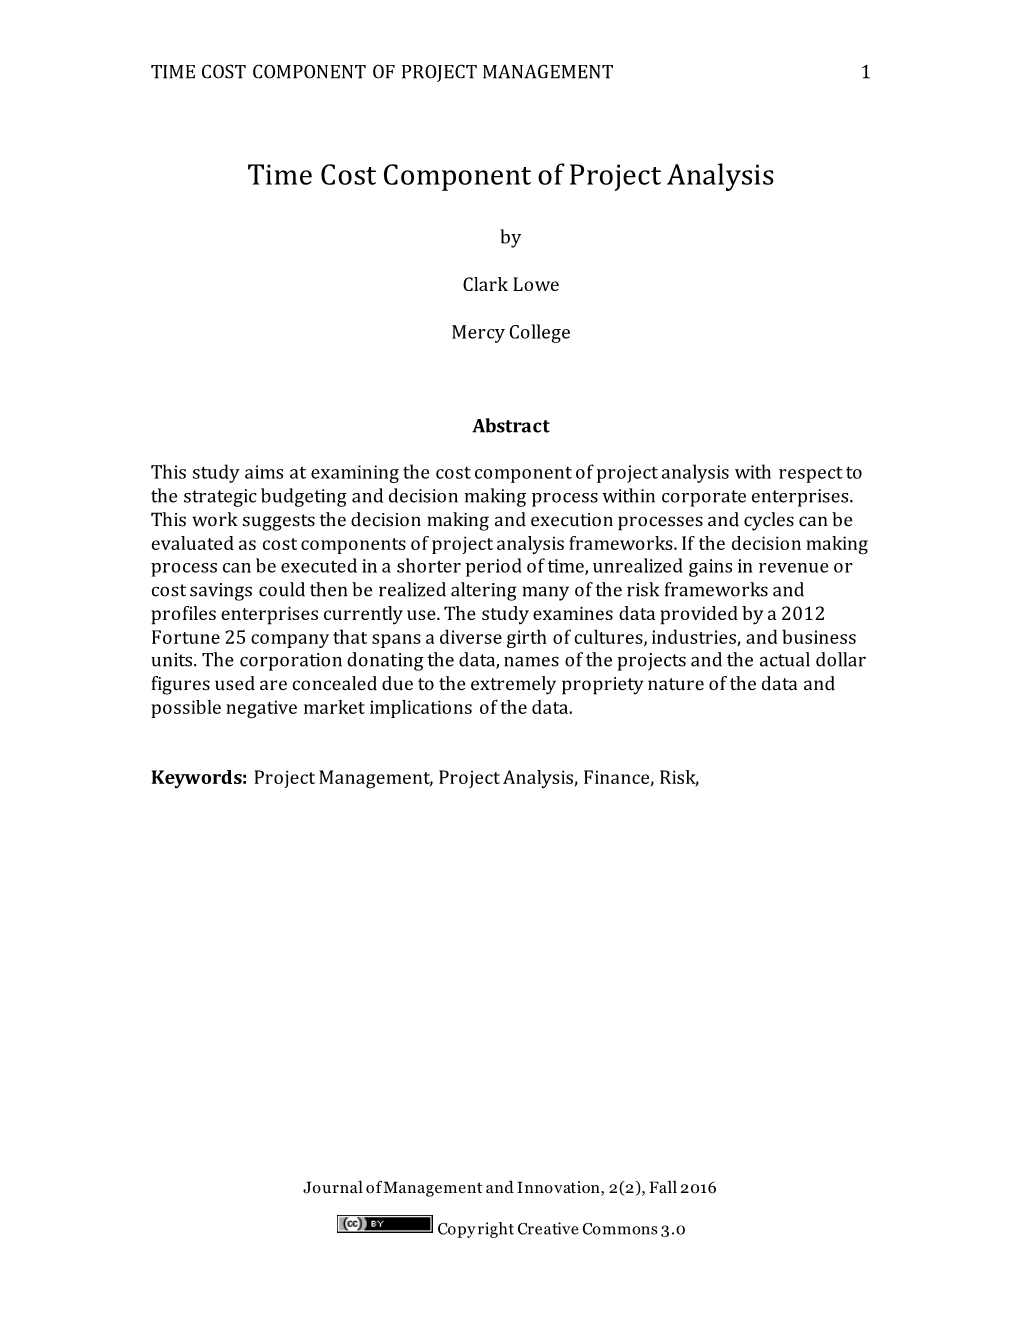 Time Cost Component of Project Analysis